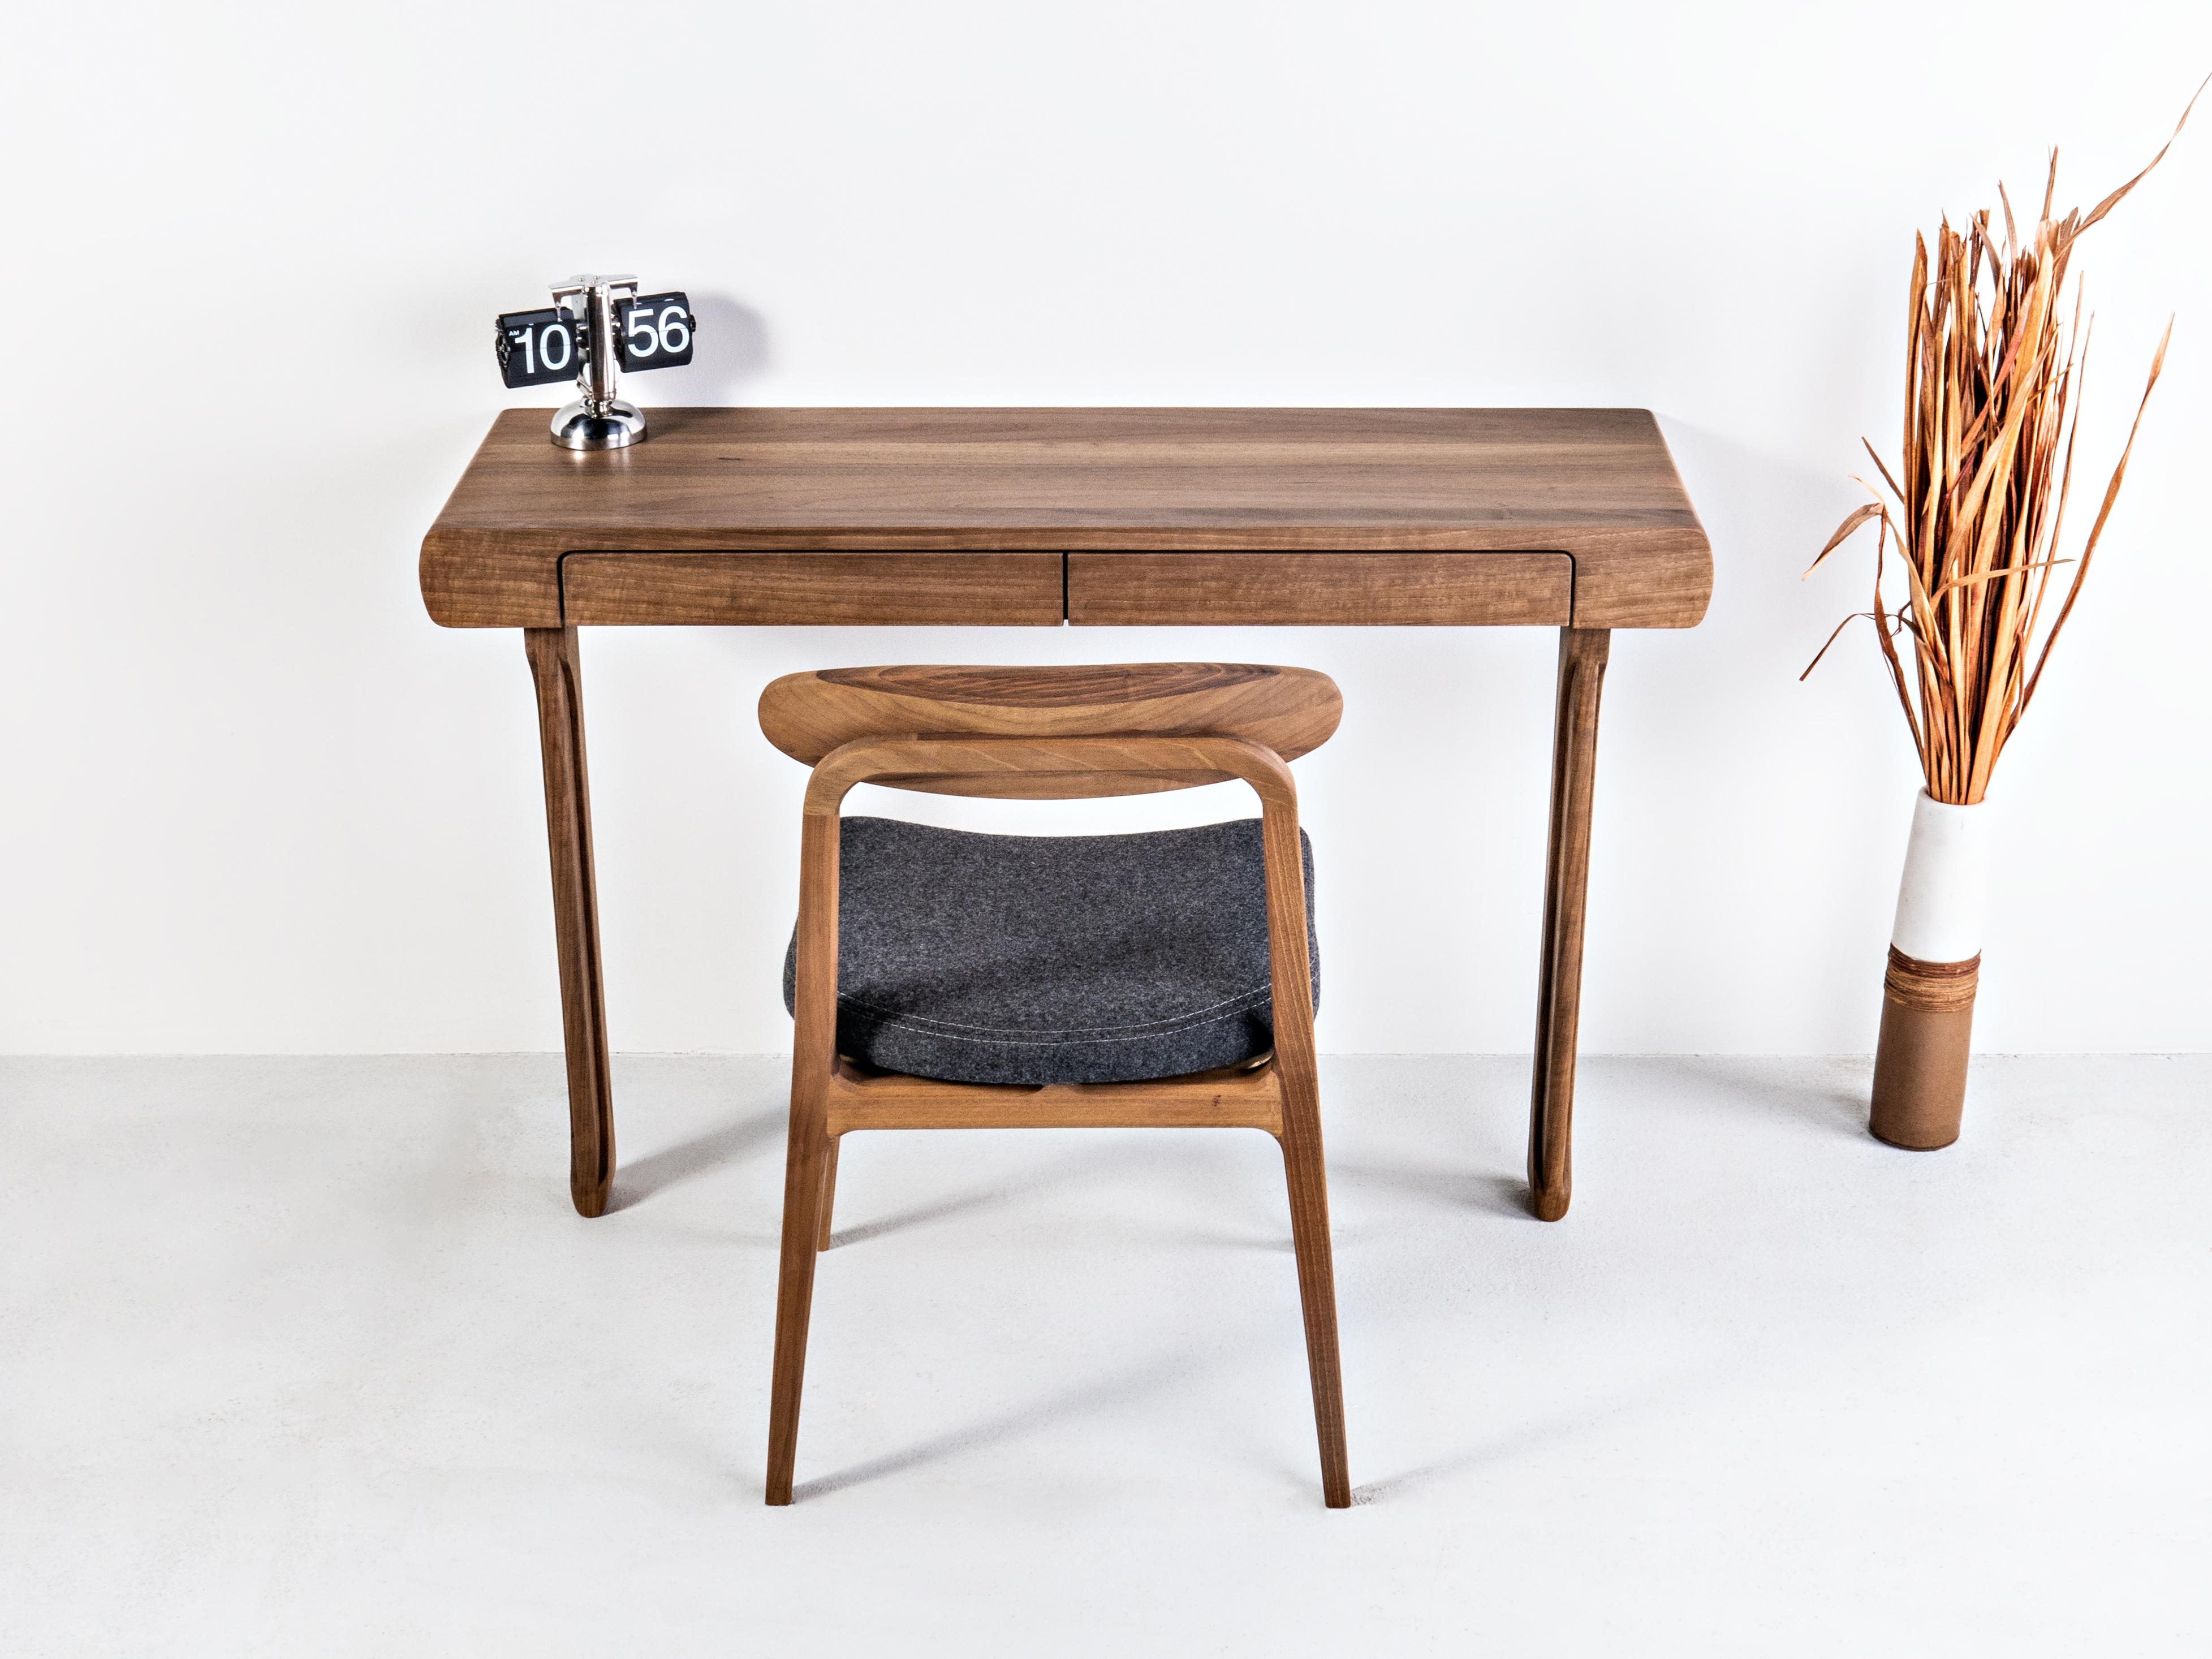 This table of minimalistic look can be used as a dressing table in a bedroom, a mini desk or a console in the hall. It is also suitable for both public and commercial use.
With clean and clear lines, an interesting semi-oval profile with discreetly